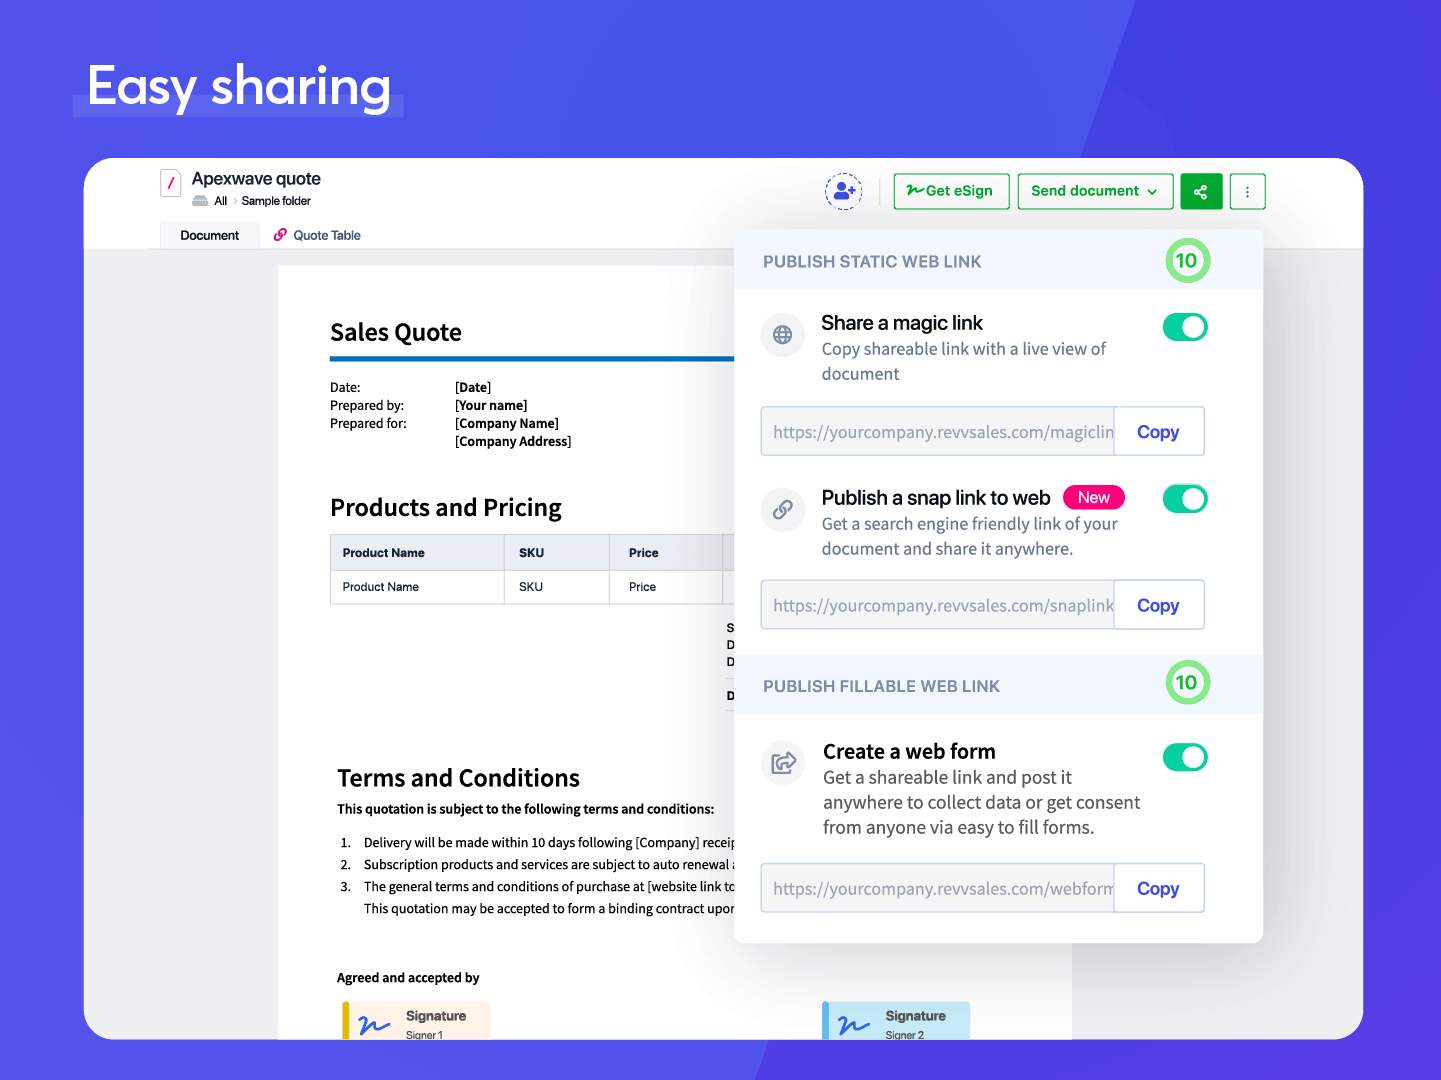 EASY SHARING - Multiple choices to share documents online via email, magic links (for live view of documents), snap links, and web forms.